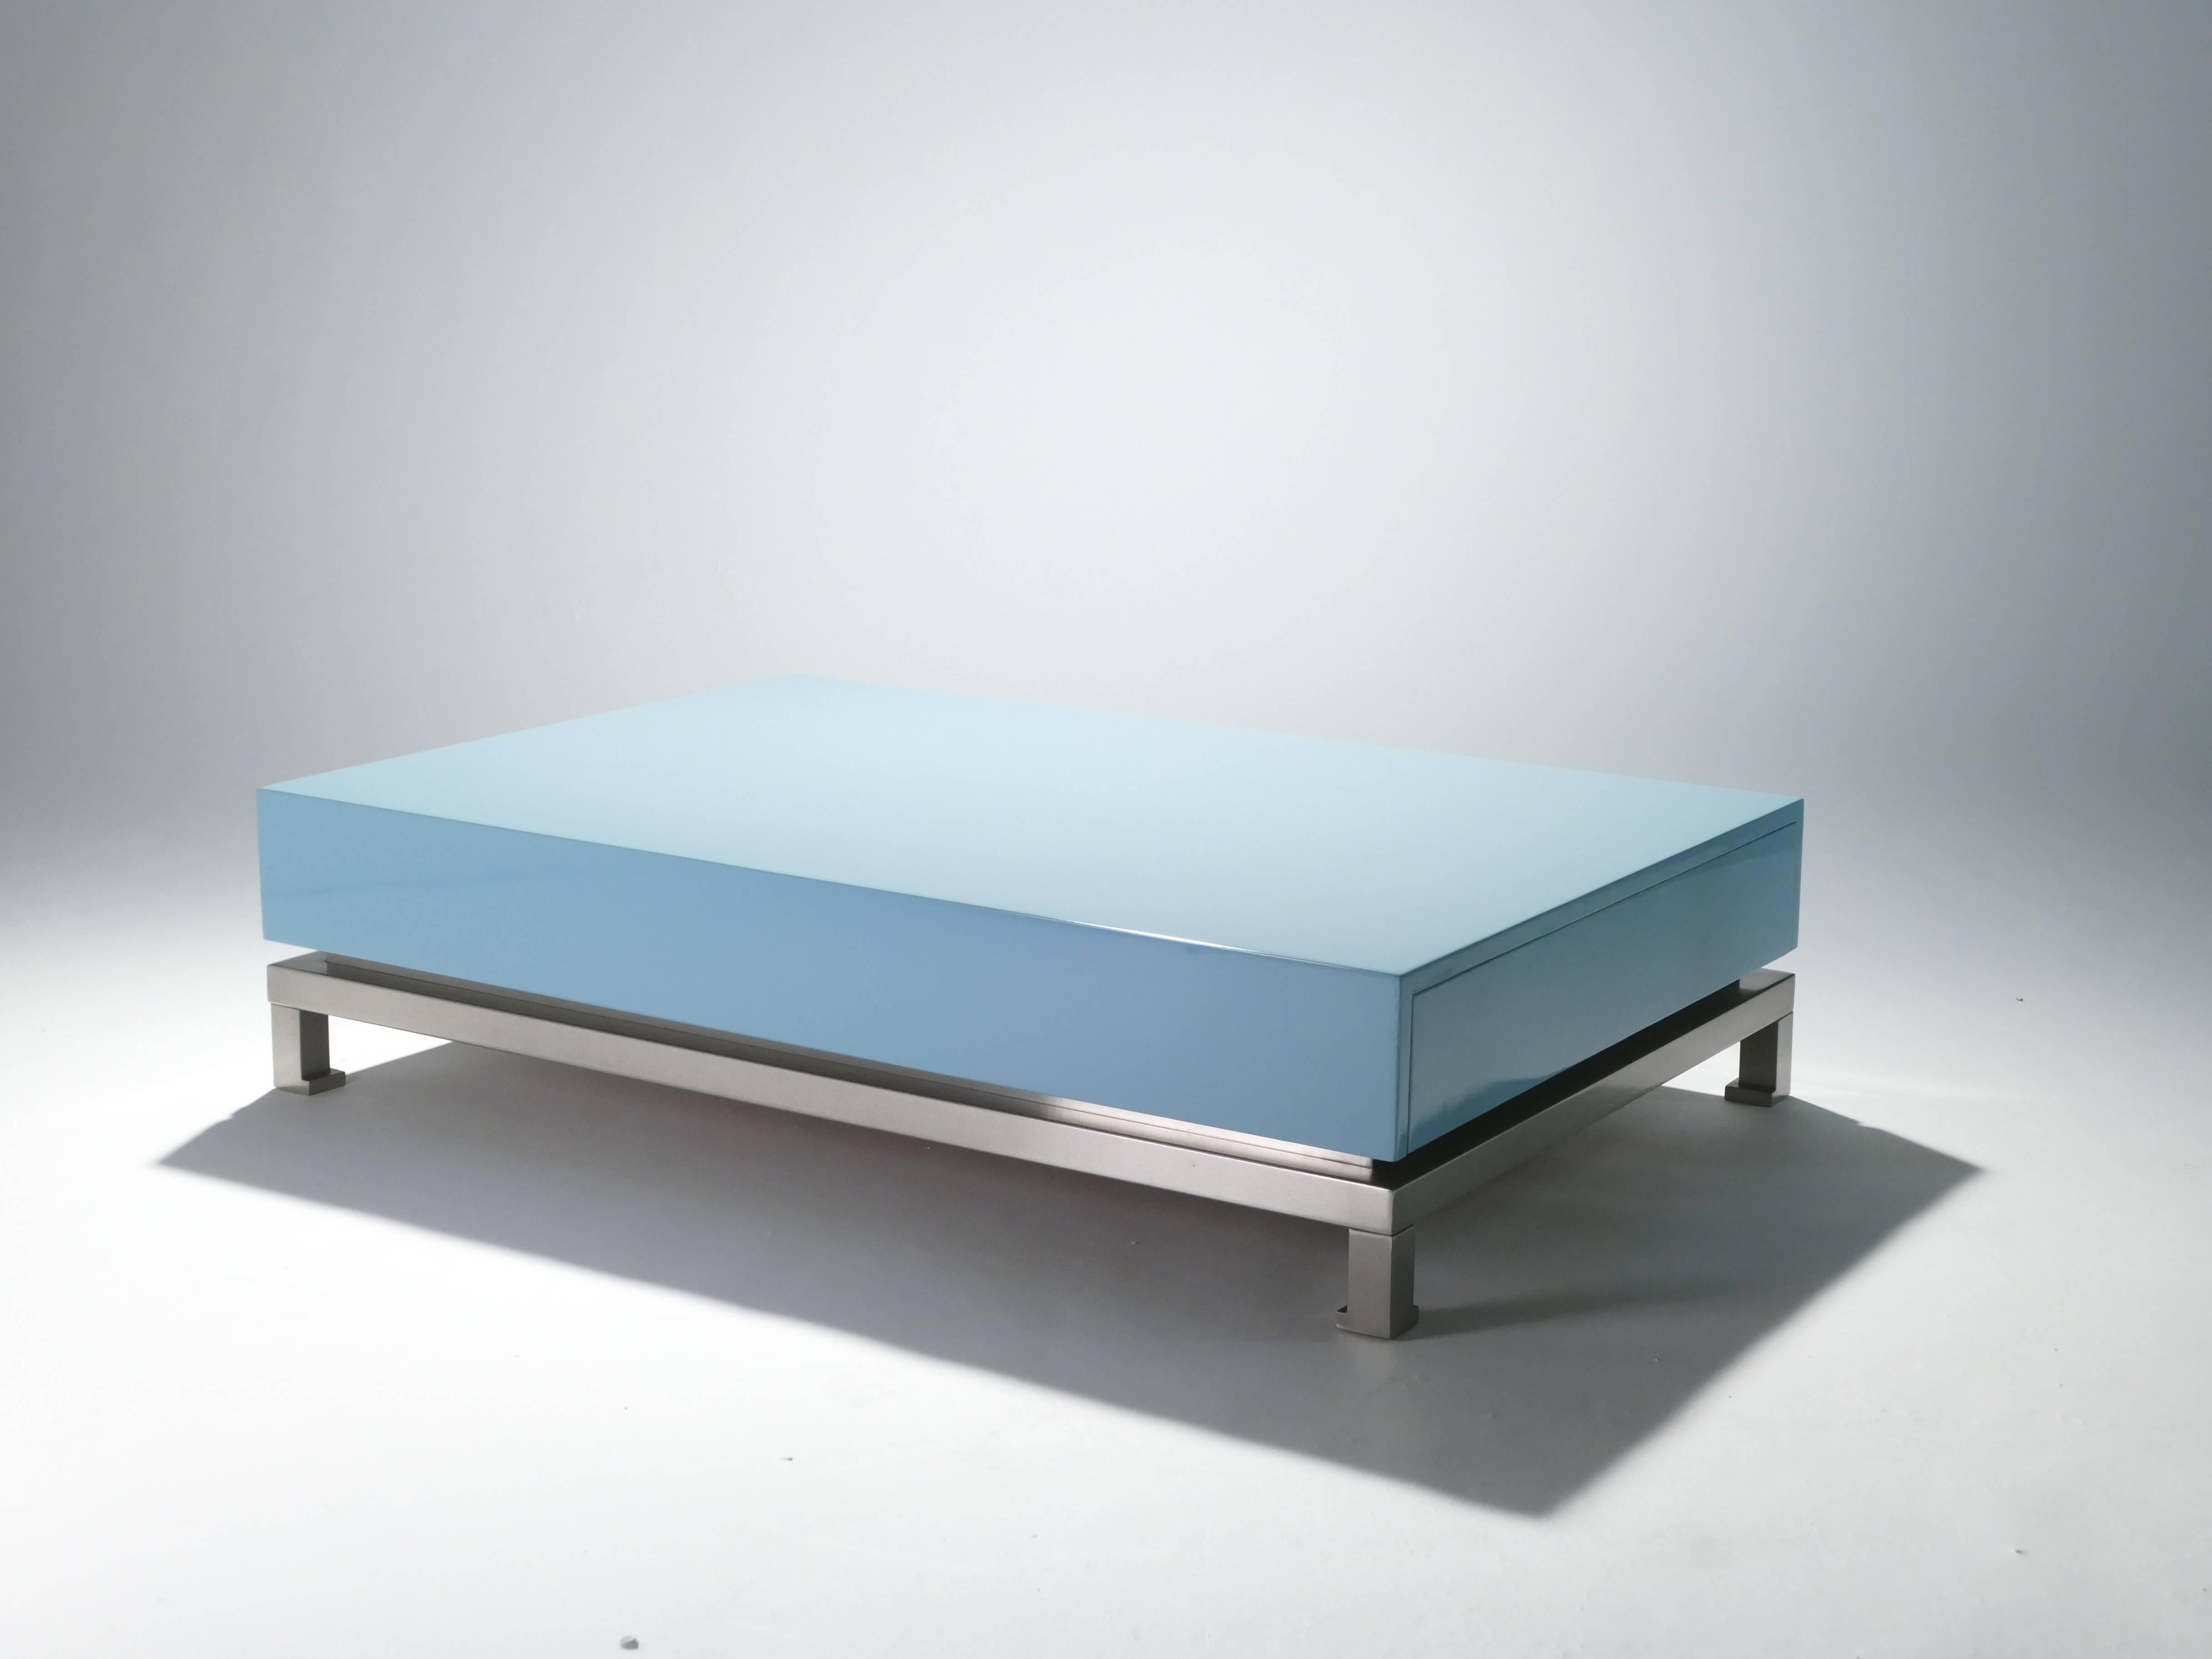 A creation of Guy Lefevre in the 1970s, this pale blue lacquer coffee table incorporates sleek and functional design. Mid-Century Modern with a pop of color, this table compliments a Minimalist or maximalist interior. Table is perched on slender